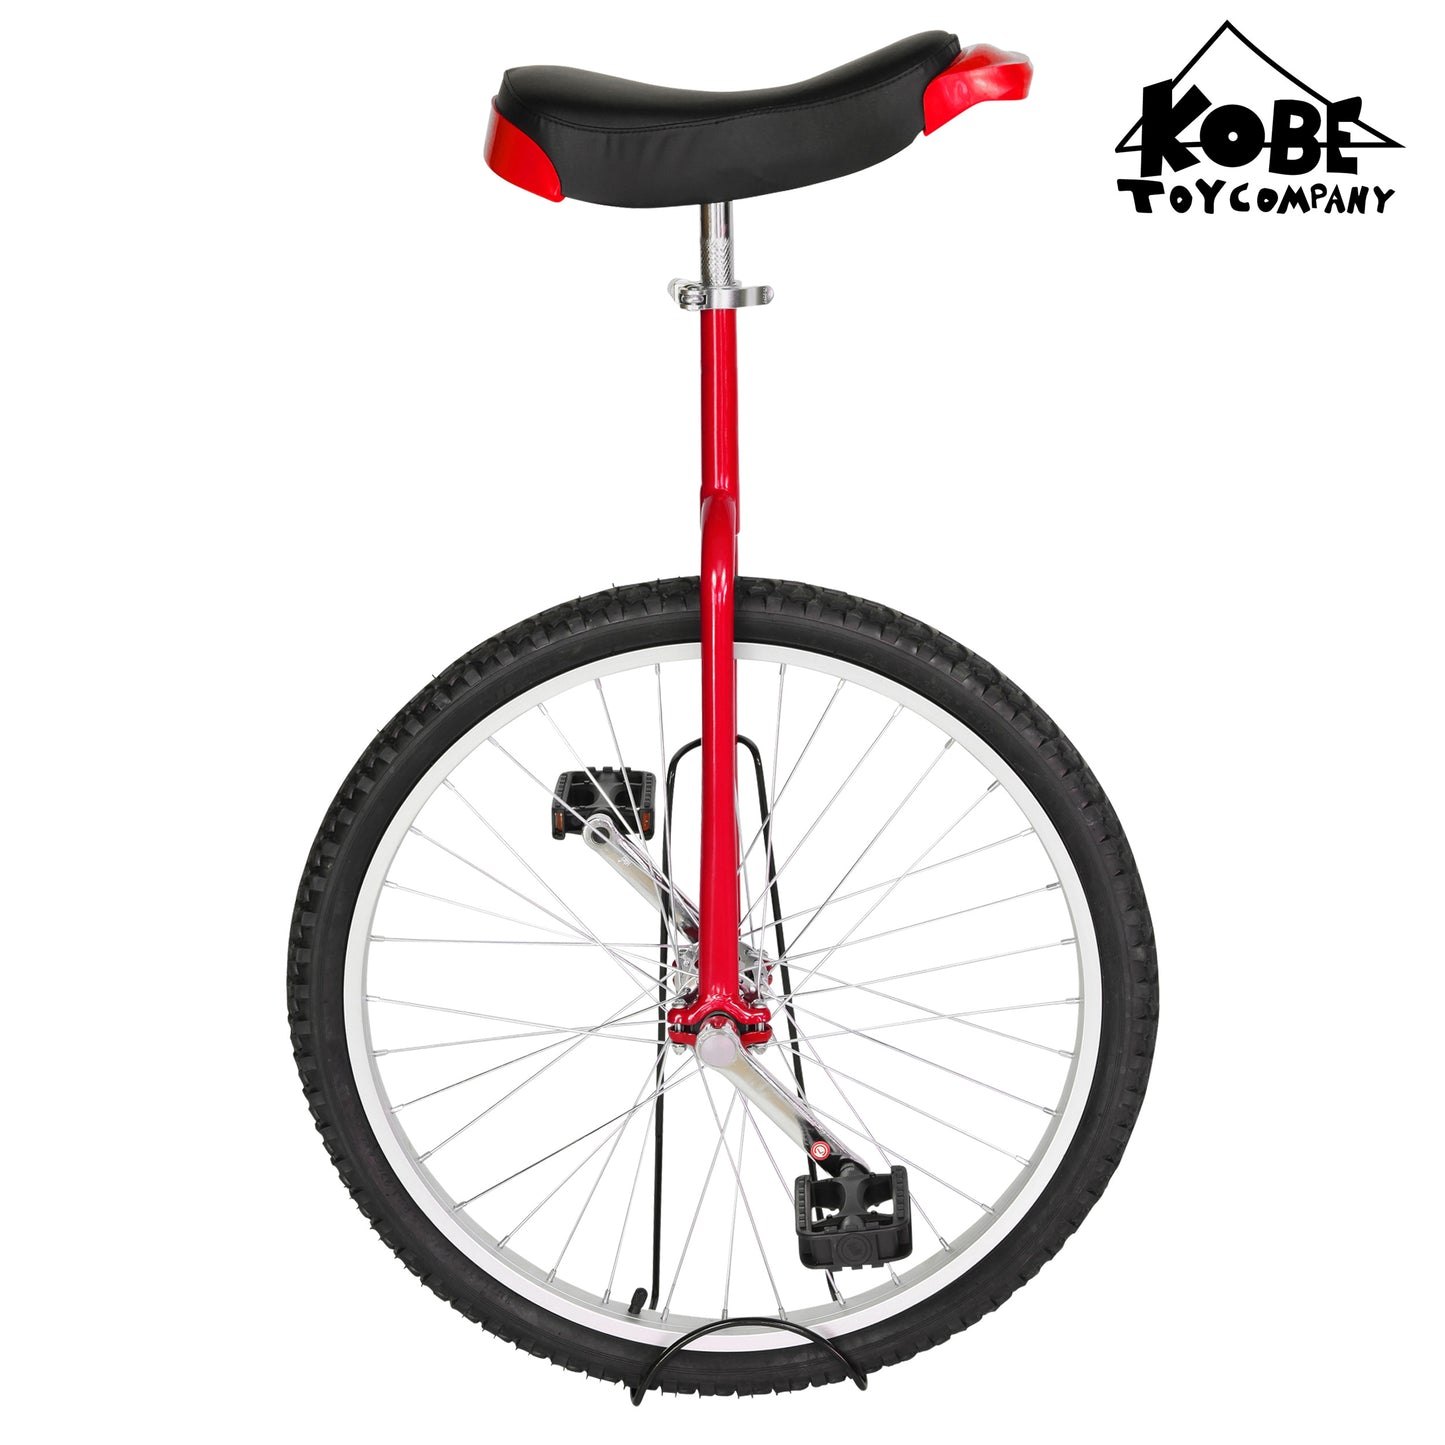 Freestyle Unicycle 24" Wheel 4 Colors Choices